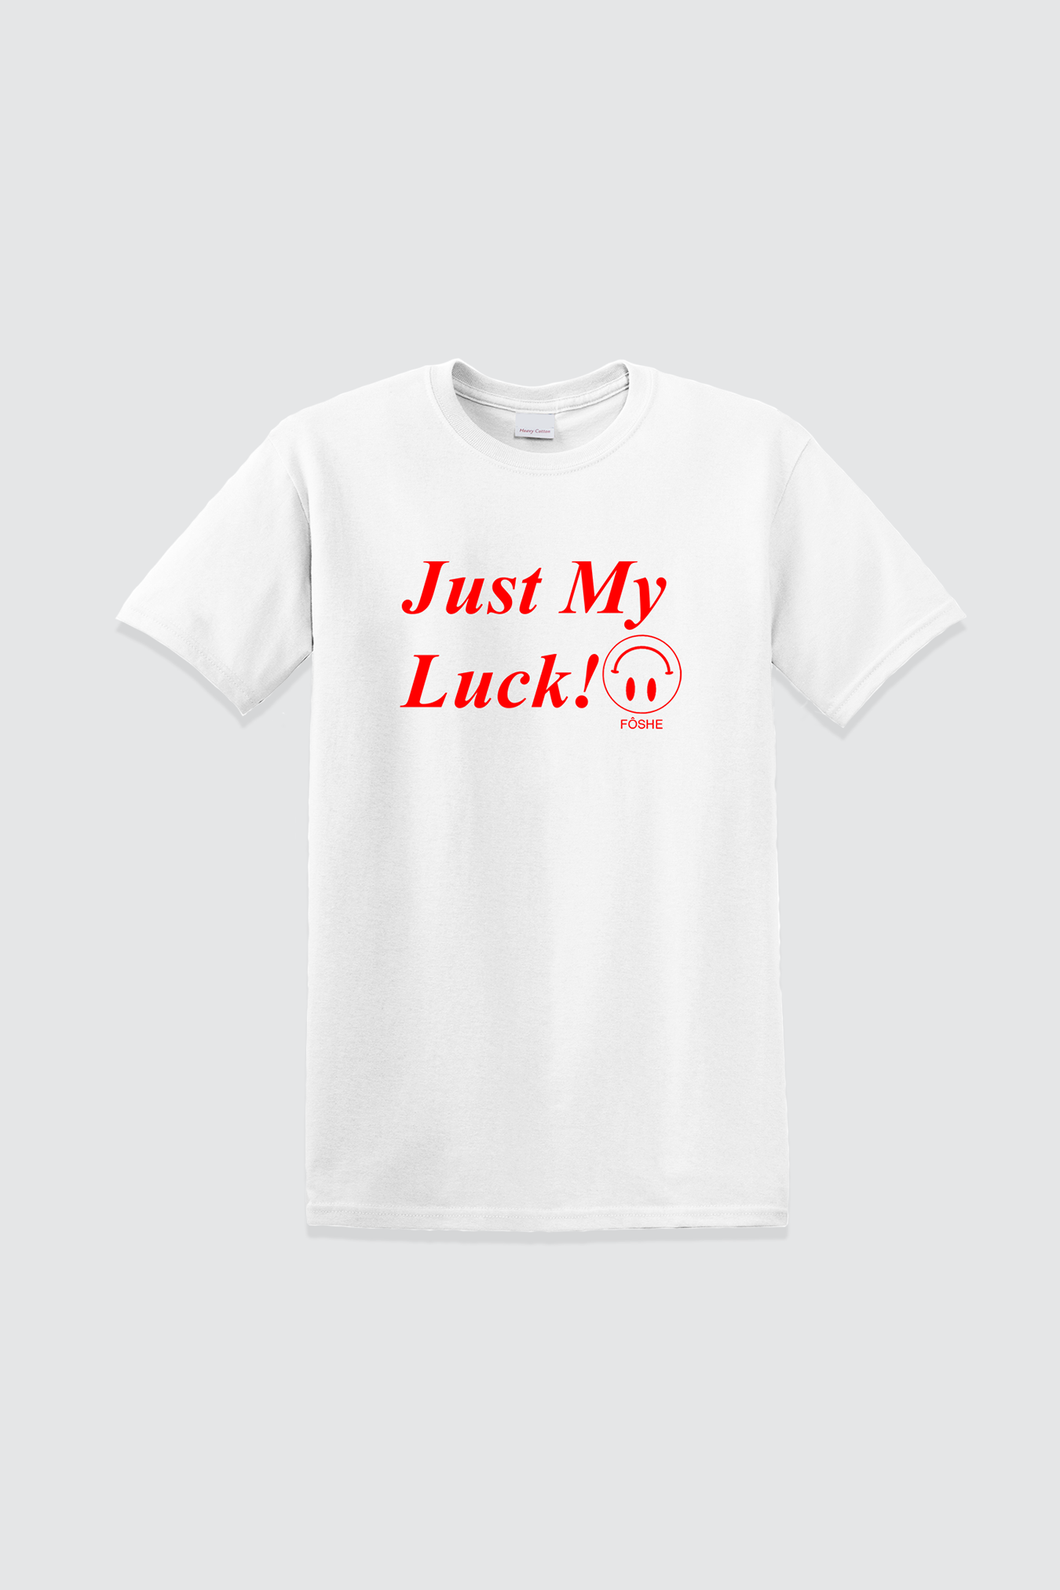 Just My Luck Tee